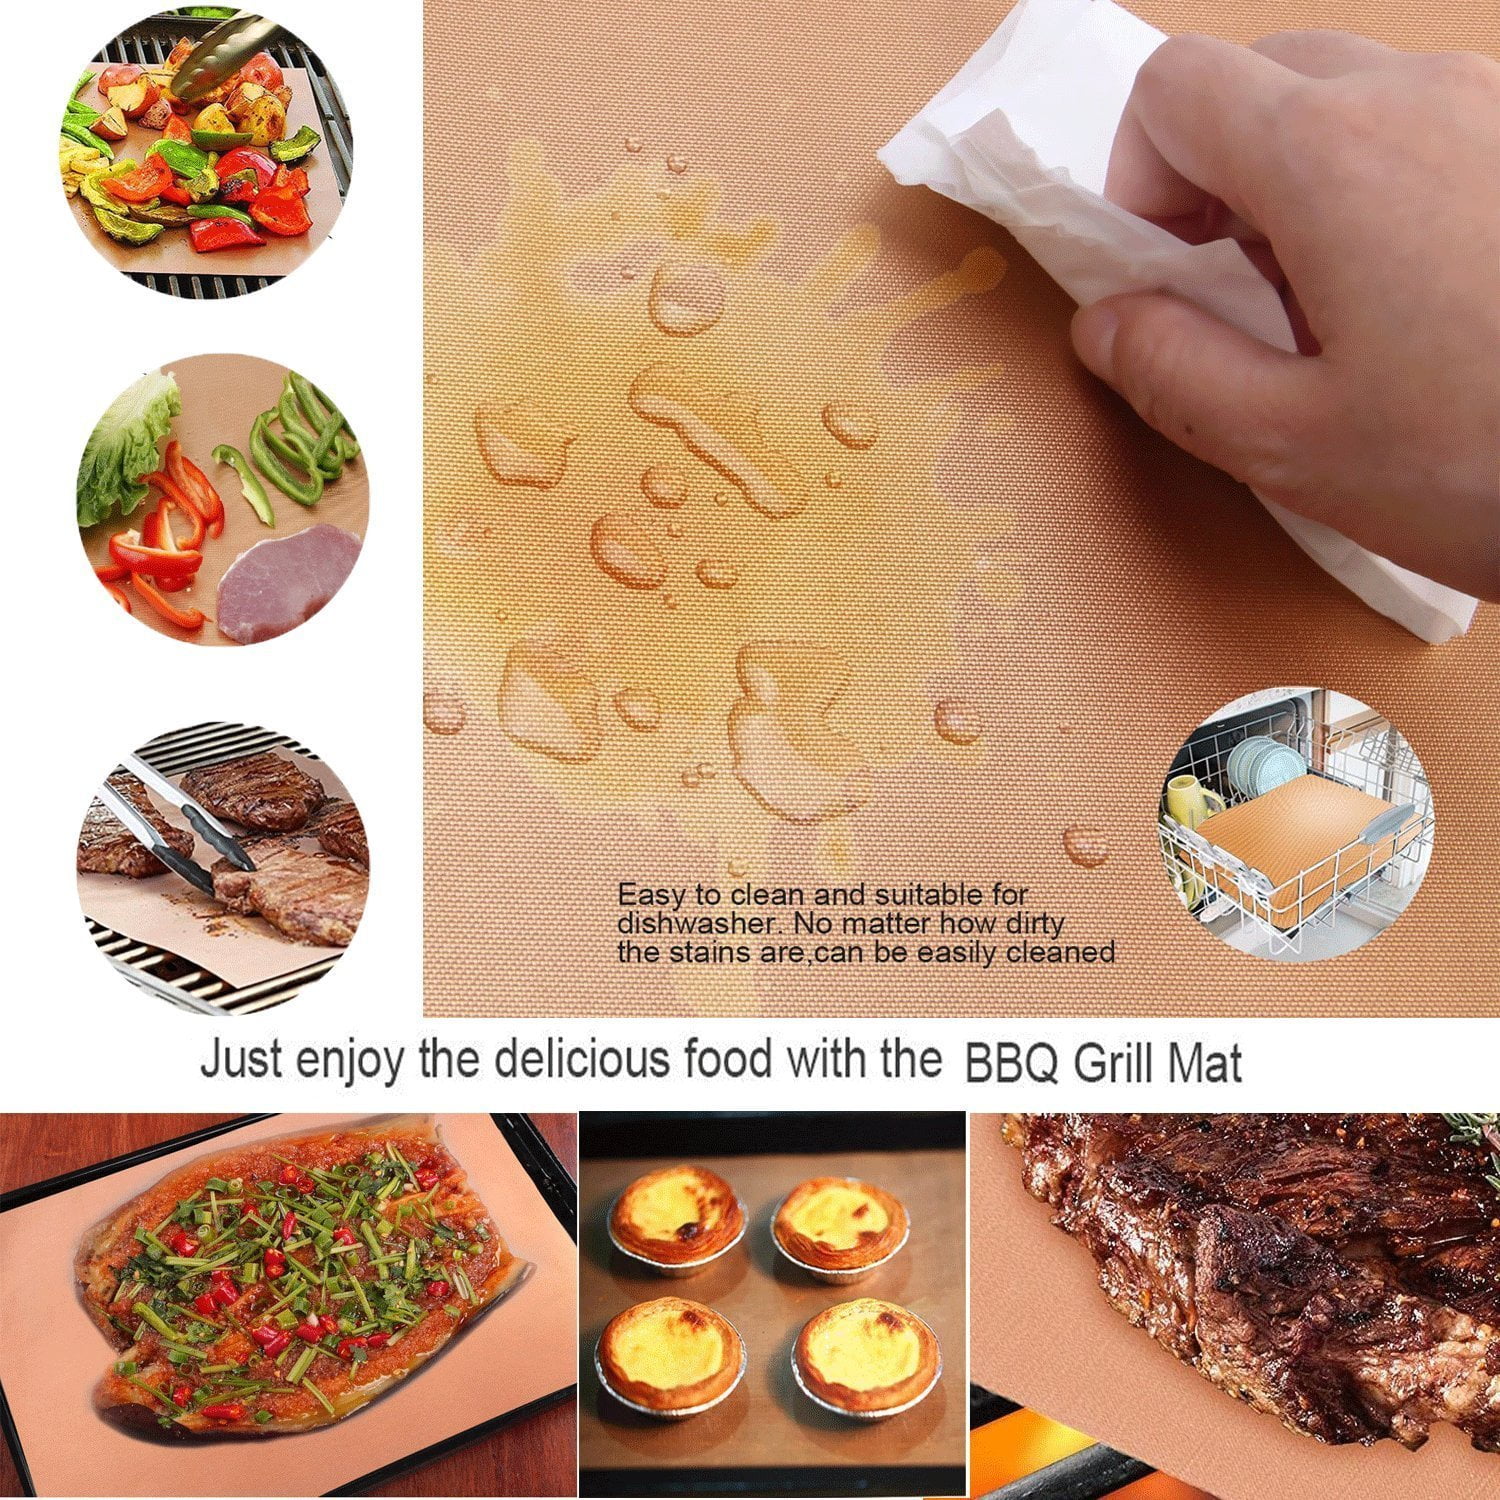 Electric Grill Set of 5 Non Stick BBQ Grill Mats Heavy Duty,Reusable and Dishwasher safe Easy Clean & Easy Use on Gas Charcoal Grill Mat PTFE Teflon Baking sheets 